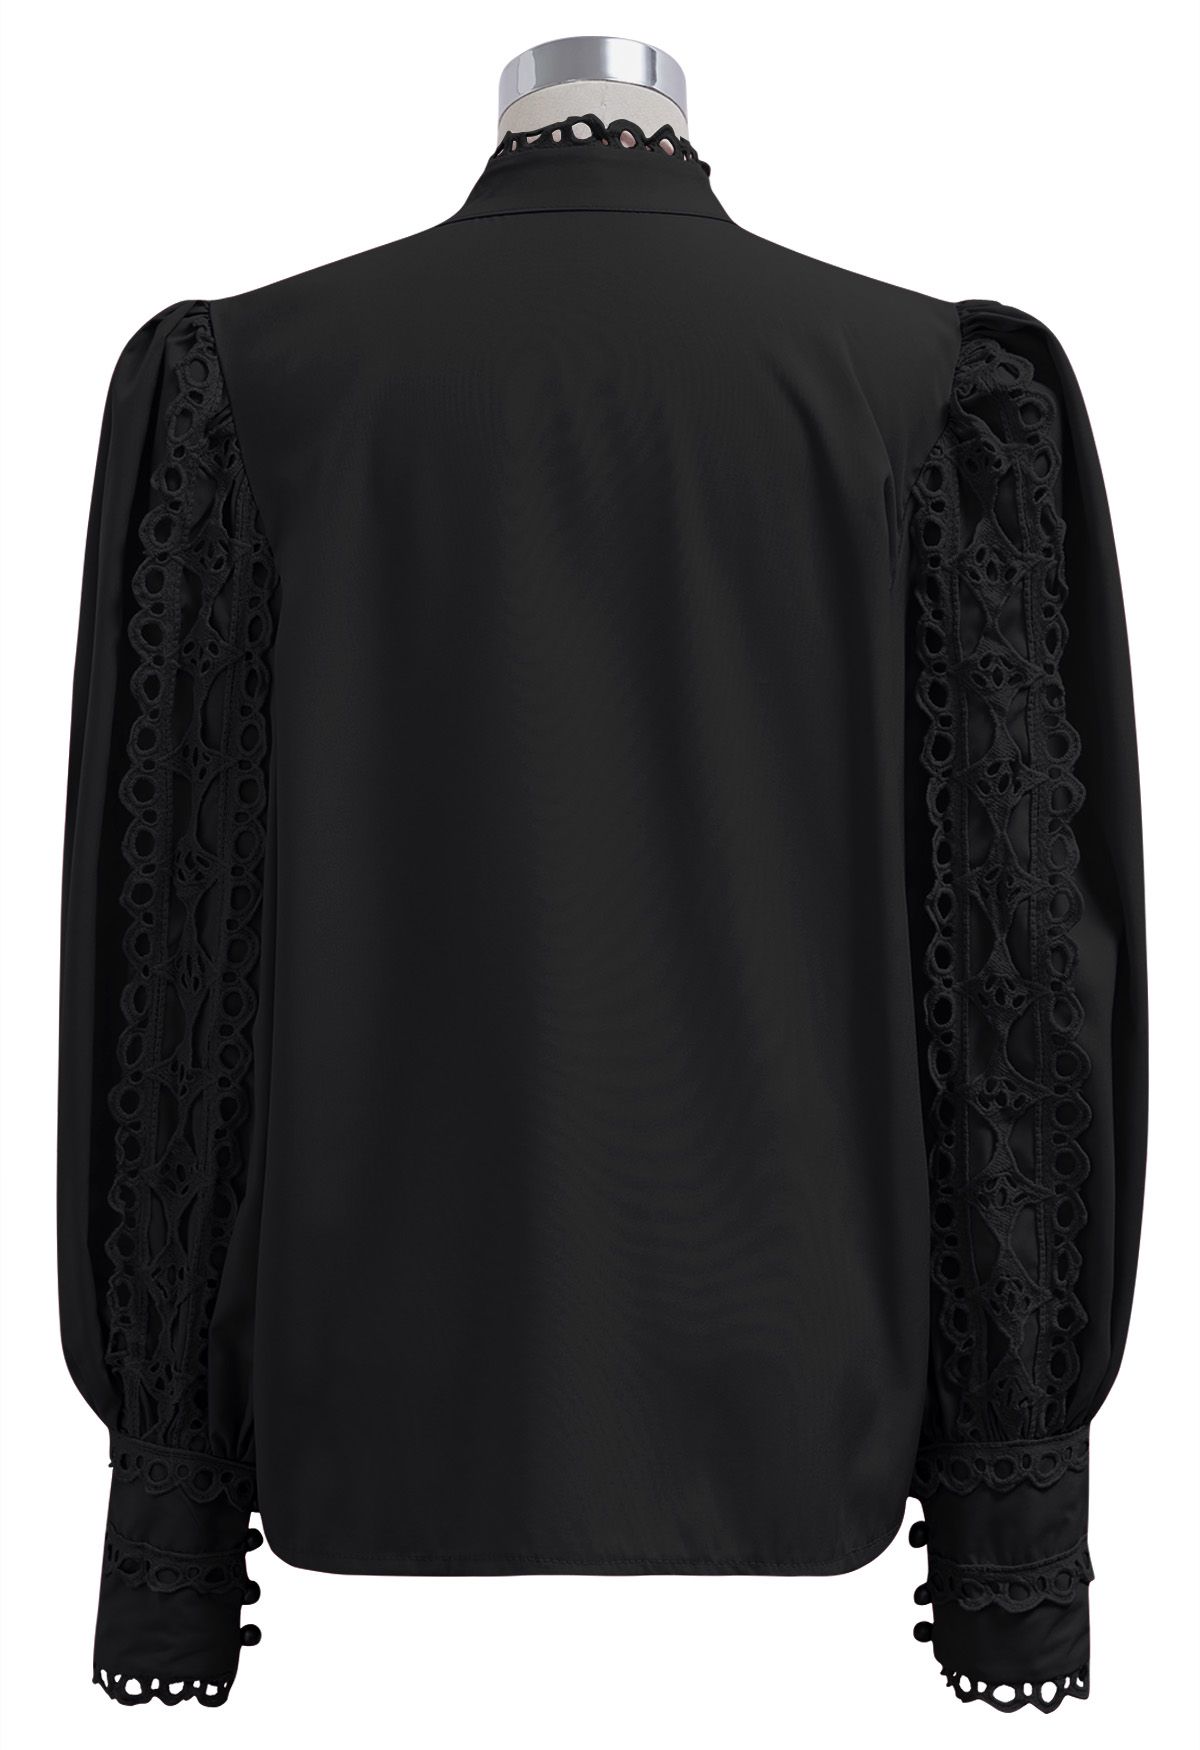 Exquisite Cutwork Bubble Sleeves Button-Up Shirt in Black